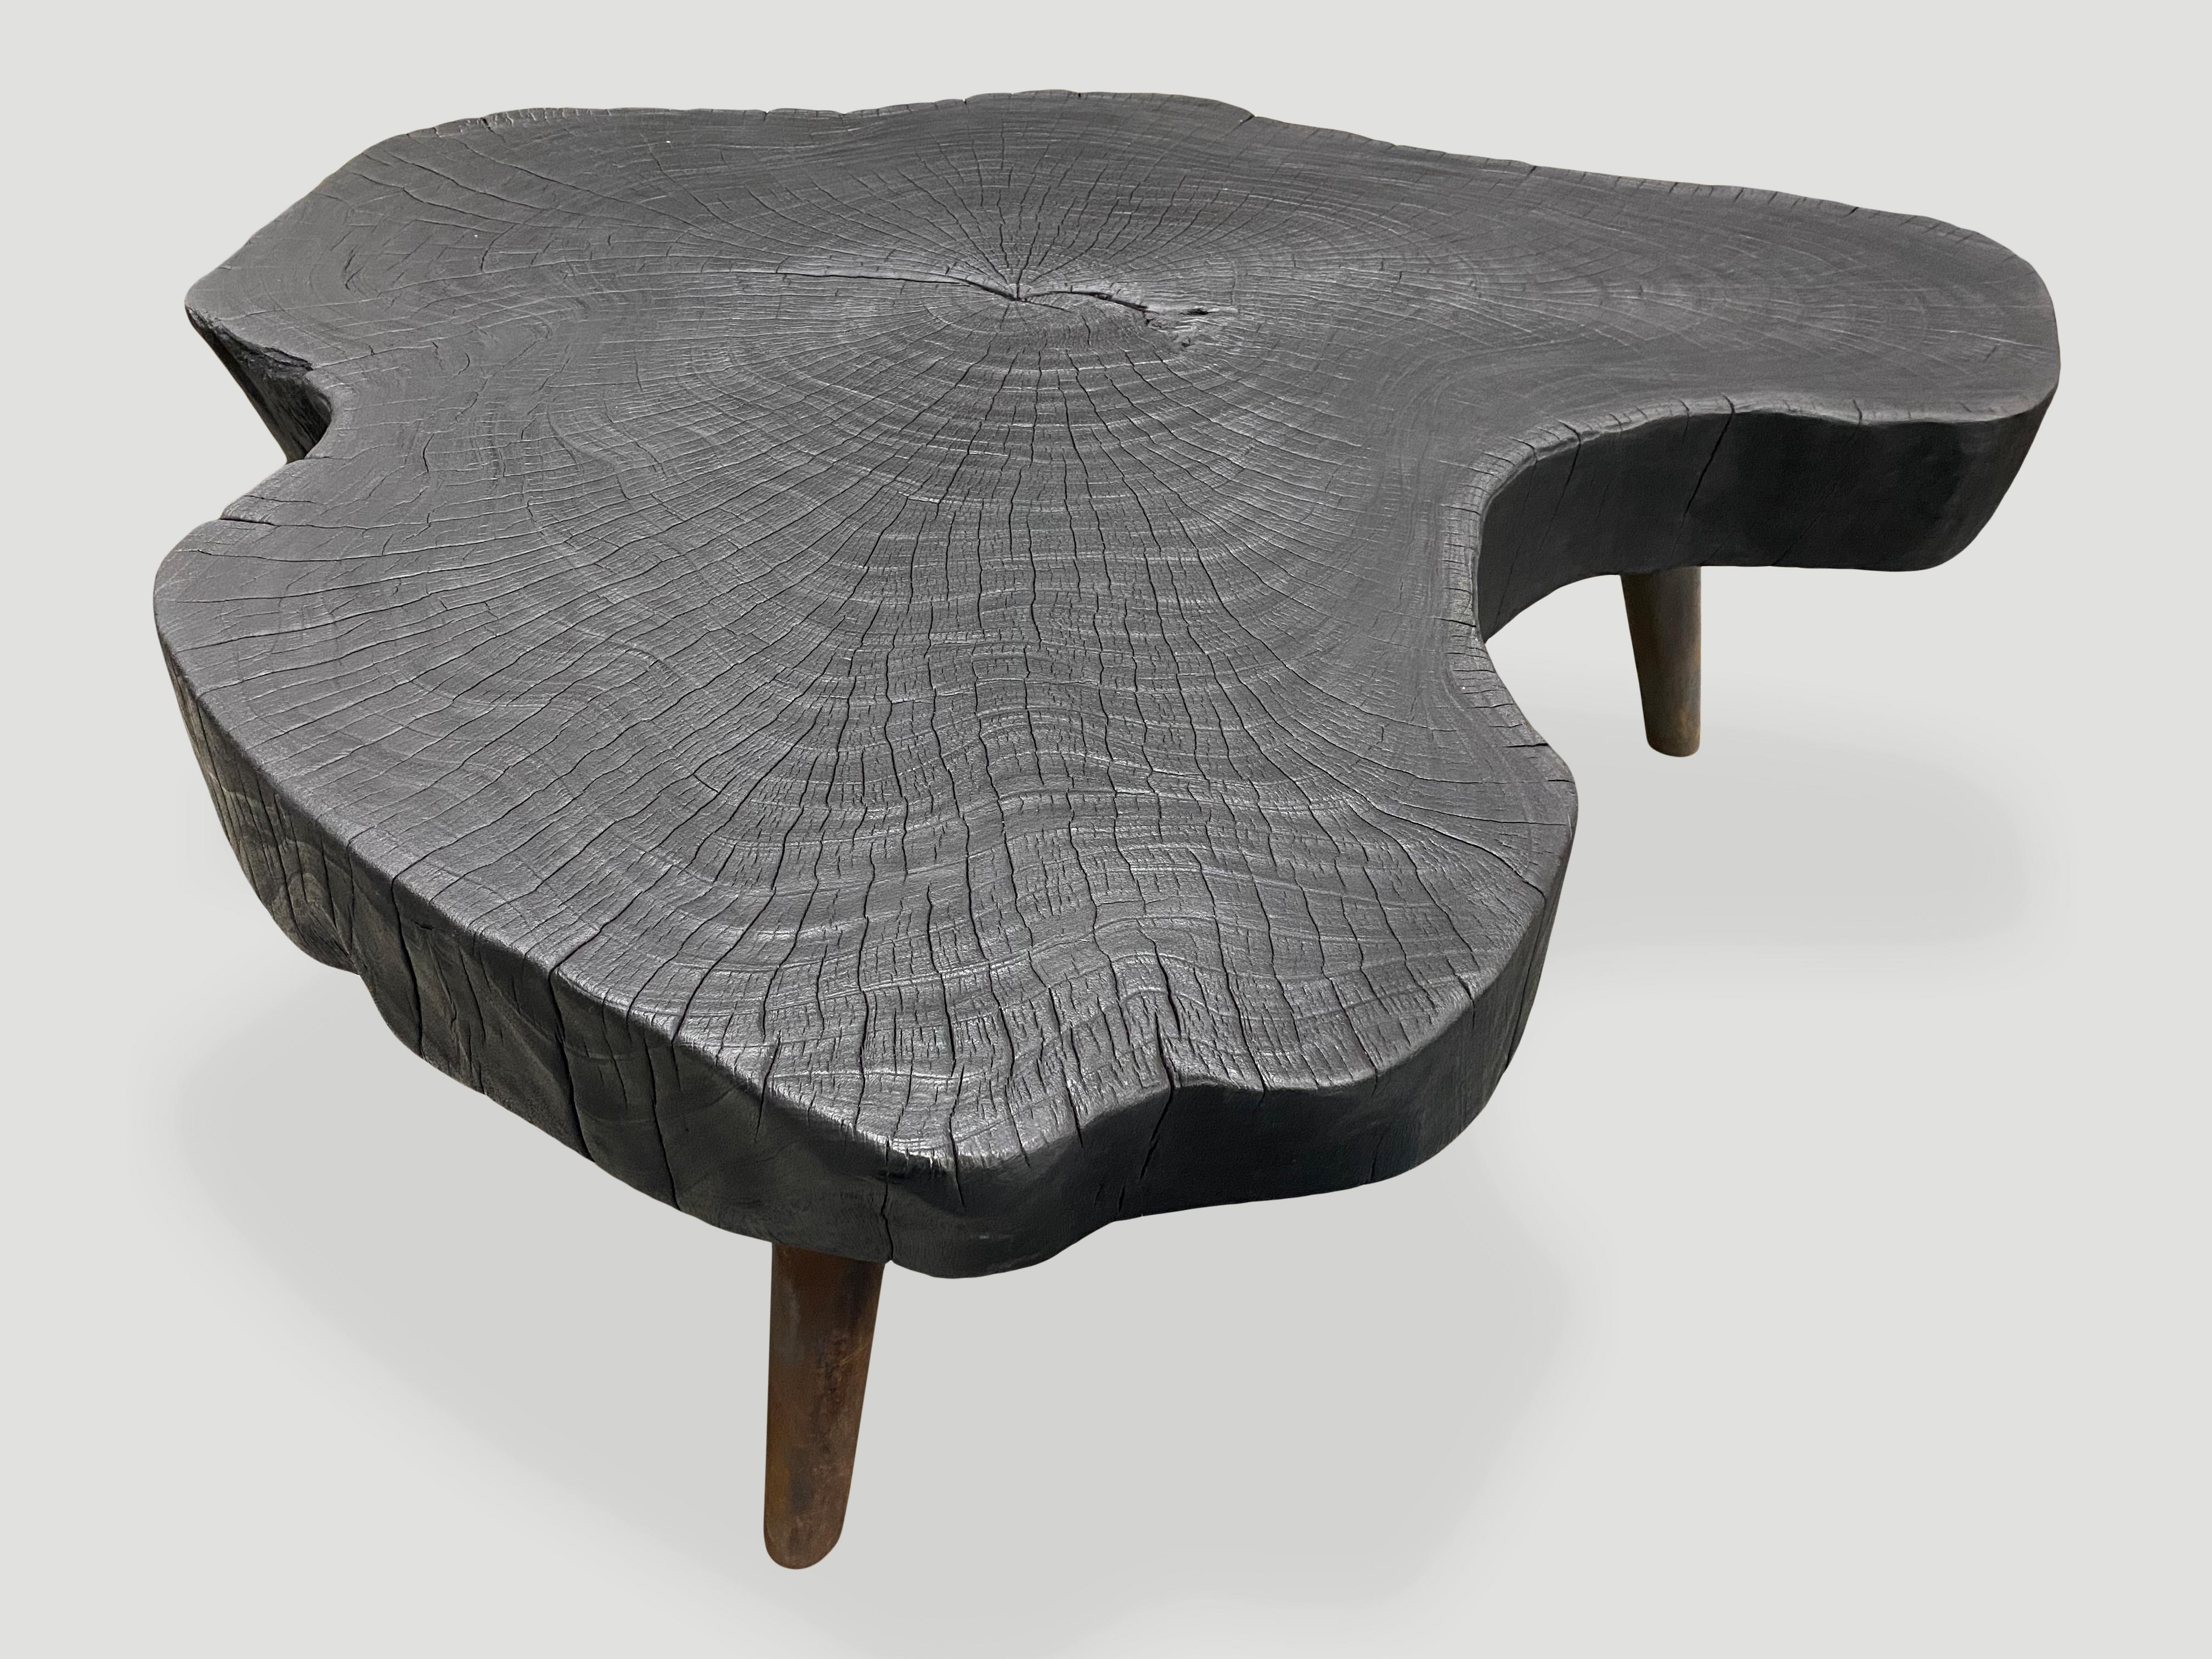 Impressive four inch thick slab coffee table, charred sanded and sealed exposing the beautiful grain of the wood. Set on mid century style burnt metal legs, which we can also finish In pure black if preferred. 

The Triple Burnt Collection